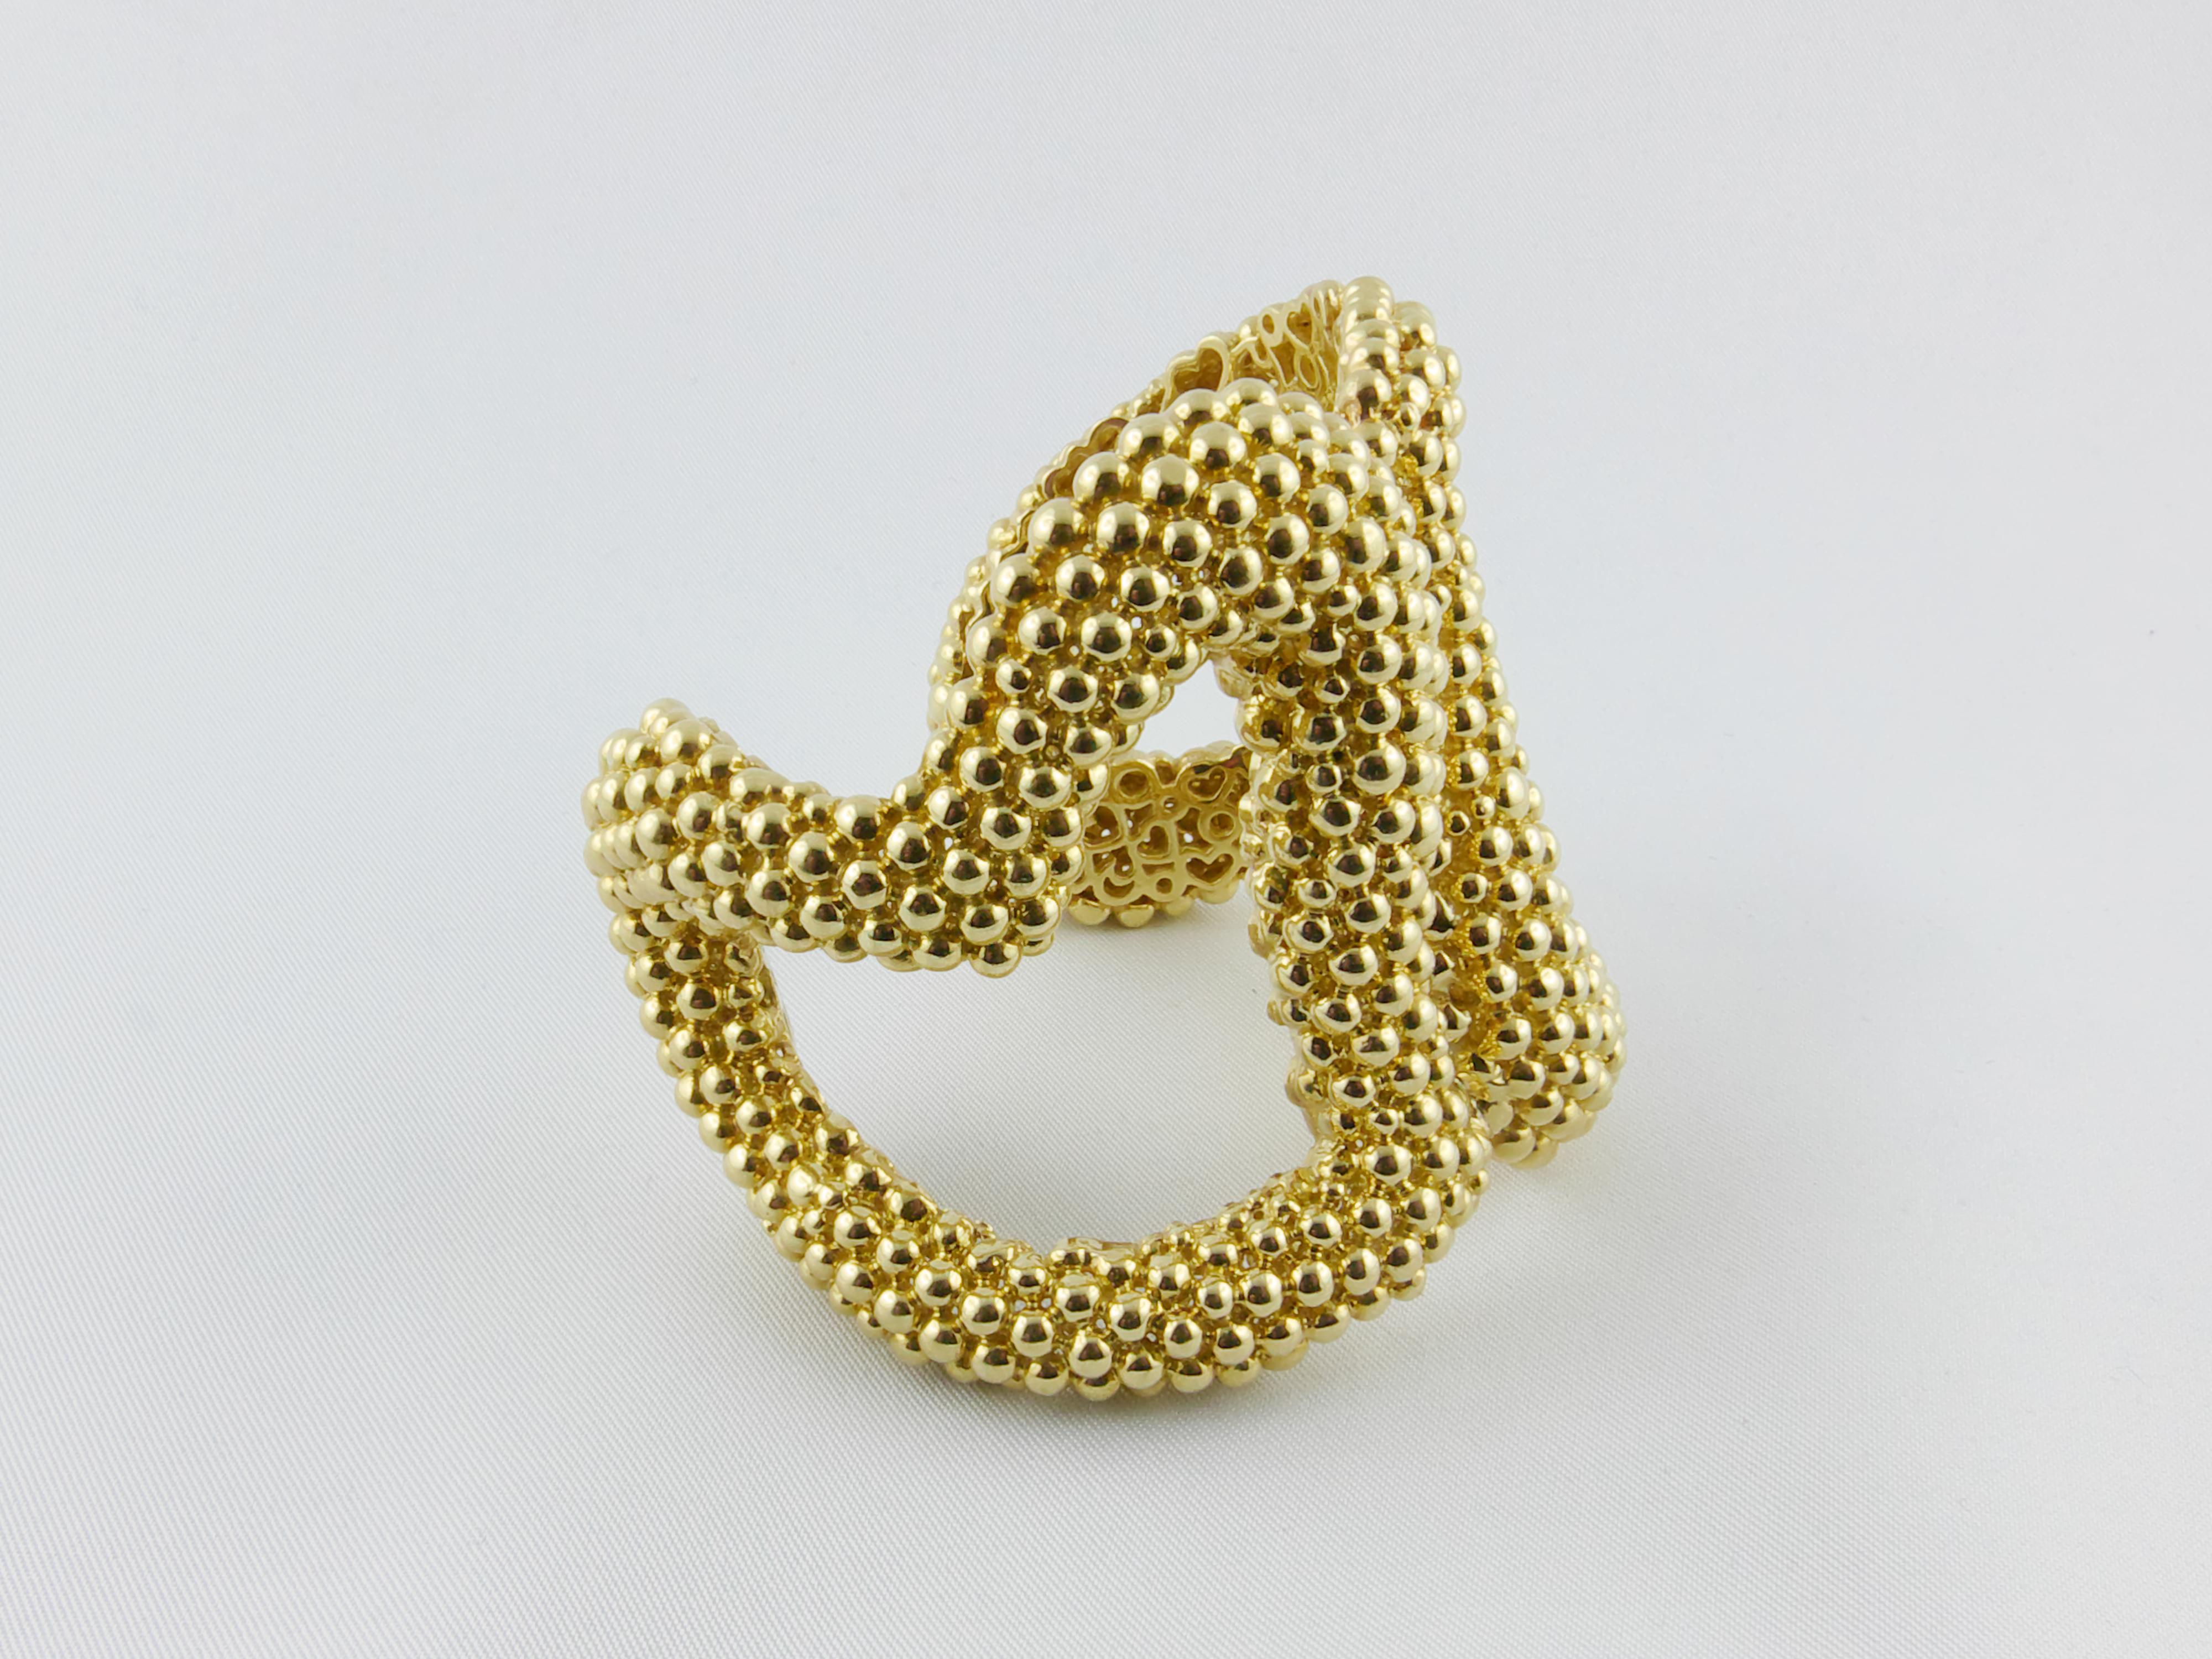 Attractive, unconventional and asymmetrical 1980s double-heart Cuff finely crafted in Italy in 18k polished solid Yellow Gold .
This modern and intriguing Bracelet is composed of polished Gold spheres  creating a textured “couscous” design. The